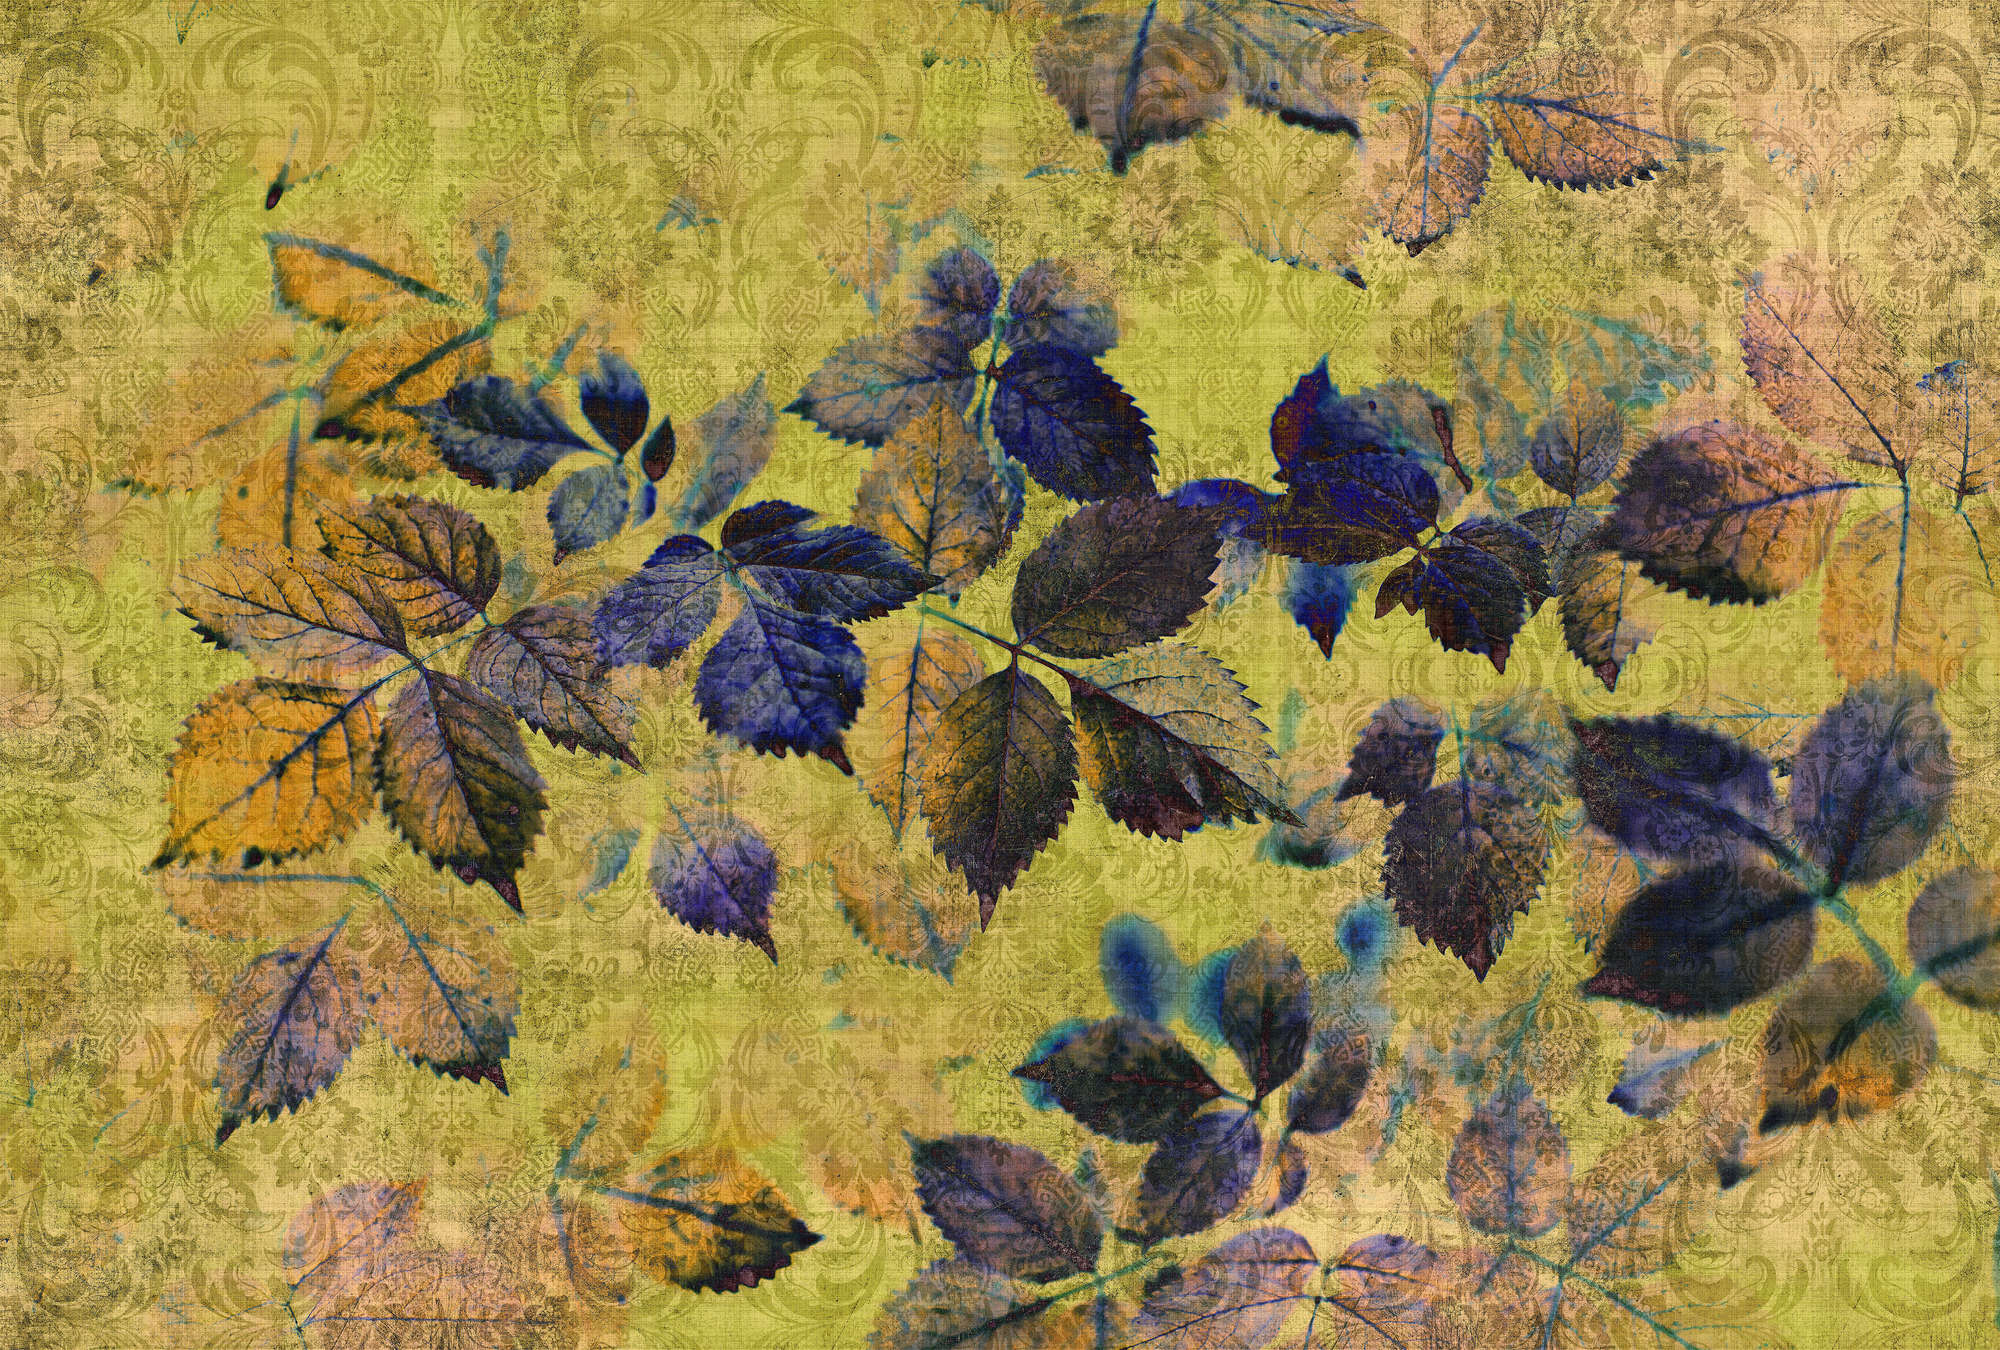             Indian summer 1 - Photo wallpaper with leaves and ornaments in natural linen structure - Yellow, Orange | Matt smooth fleece
        